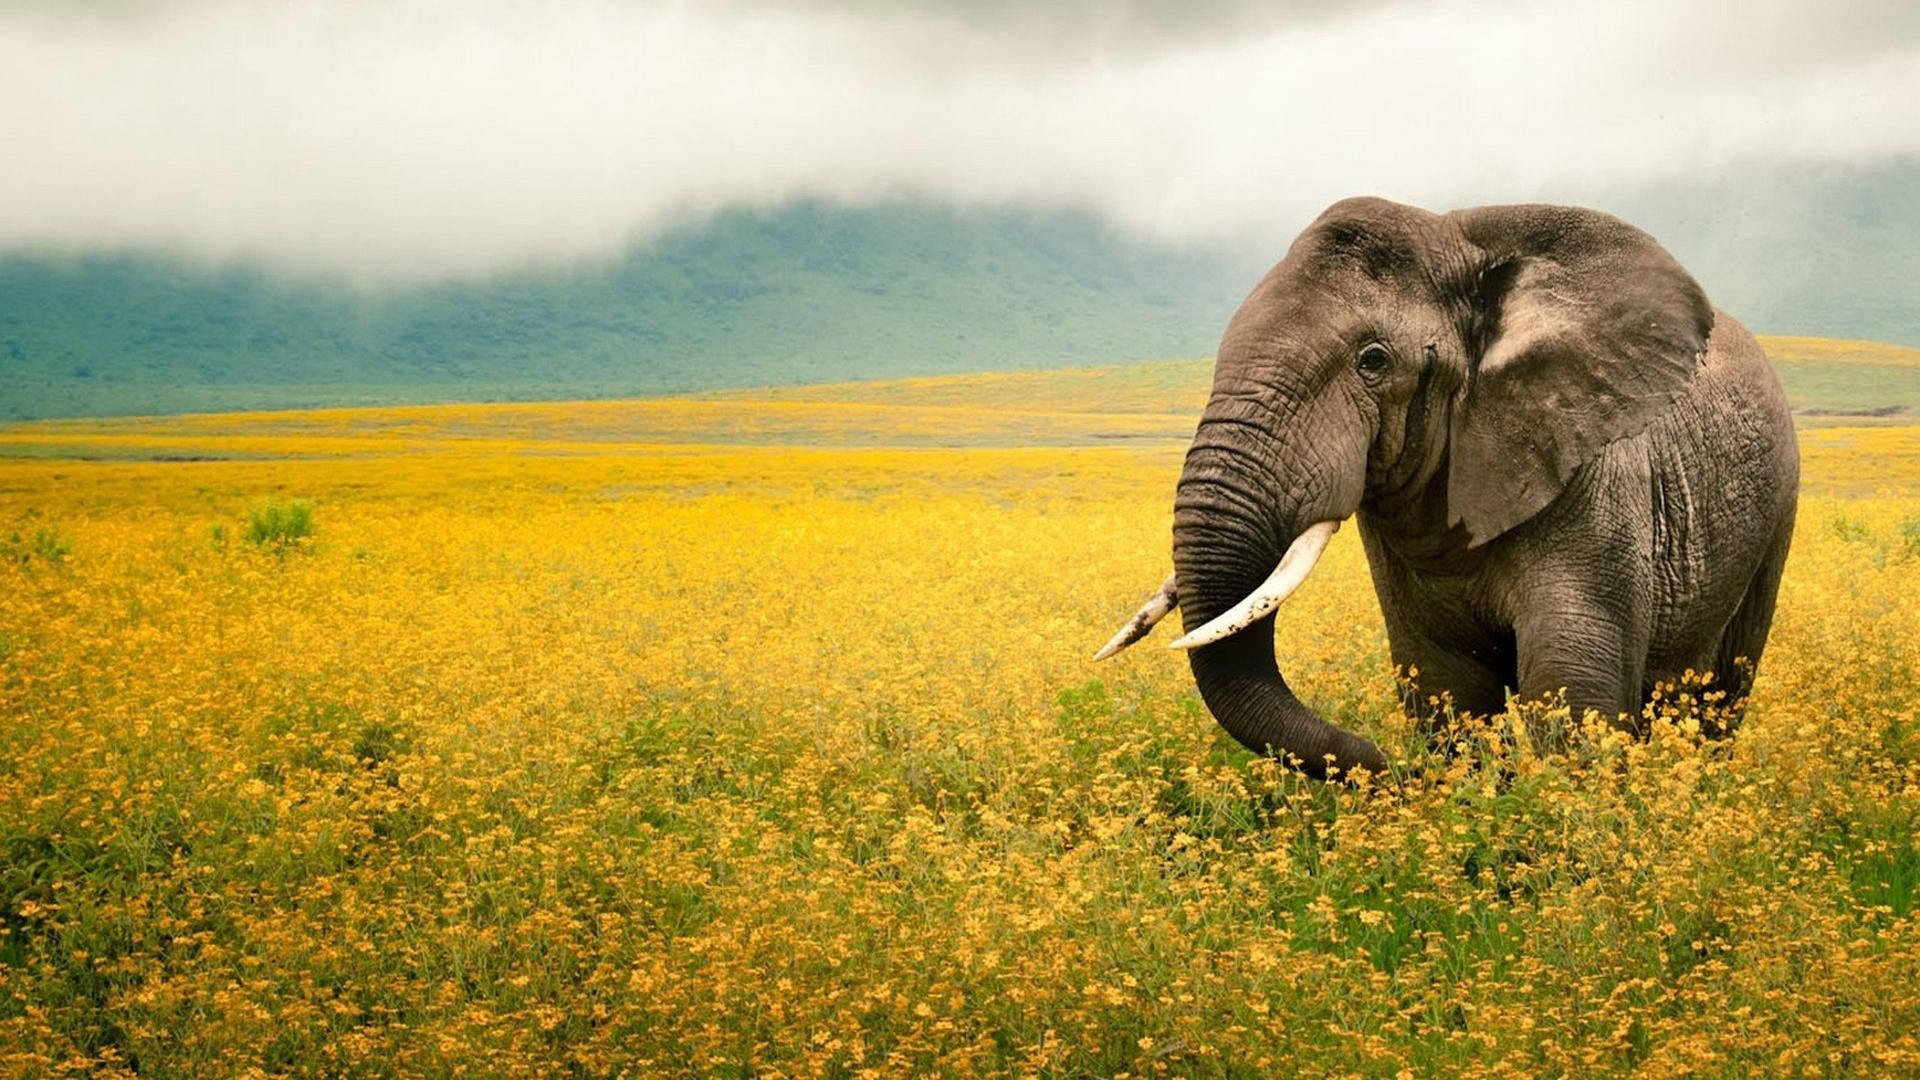 Download National Geographic Elephants Yellow Flower Wallpaper | Wallpapers .com